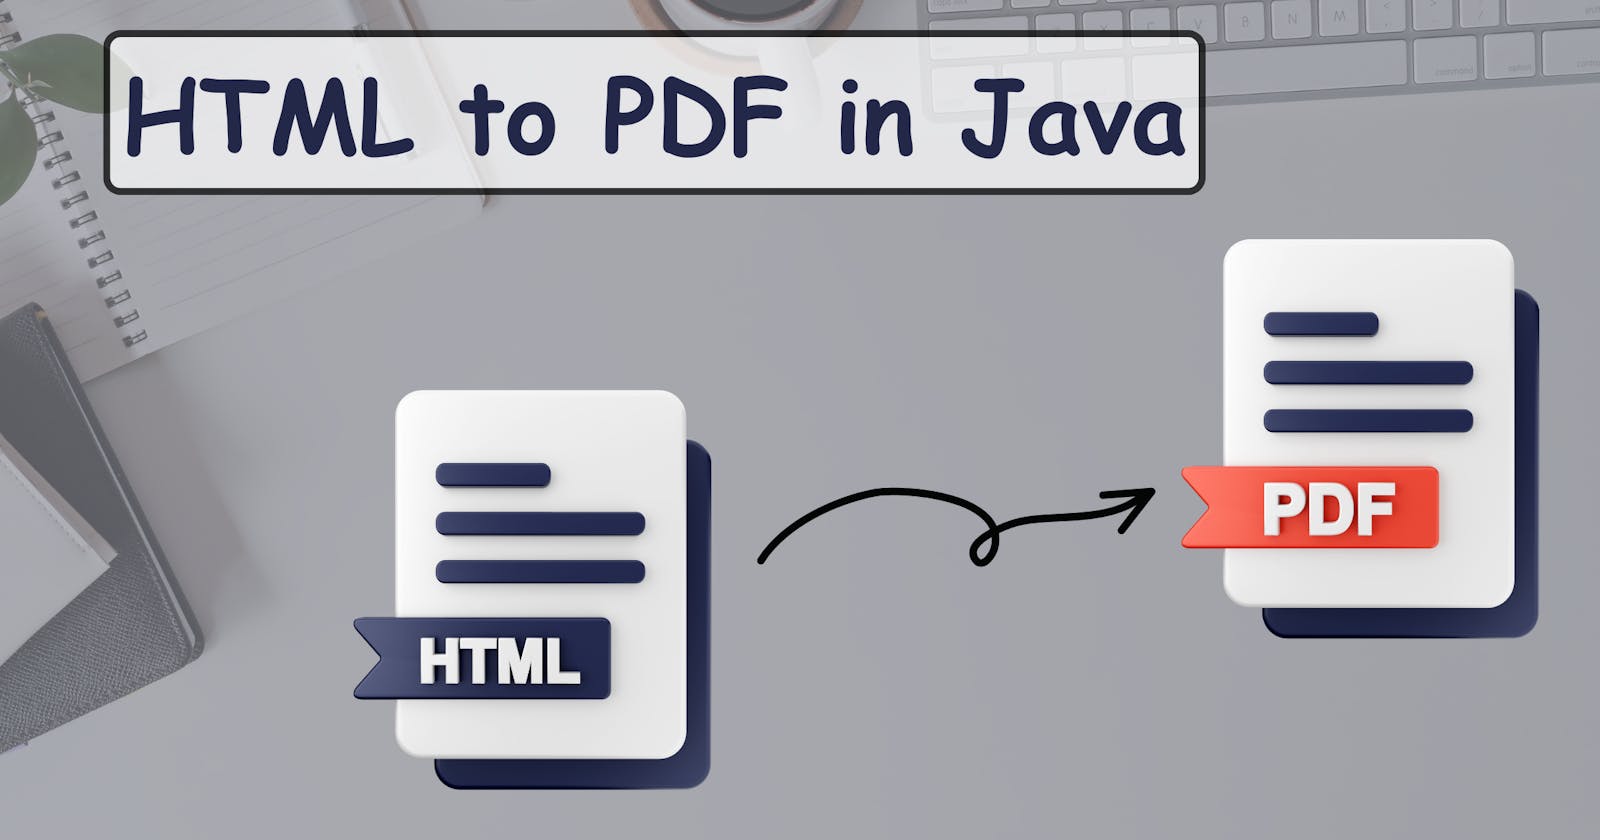 Converting HTML to PDF in Java Using Flying Saucer